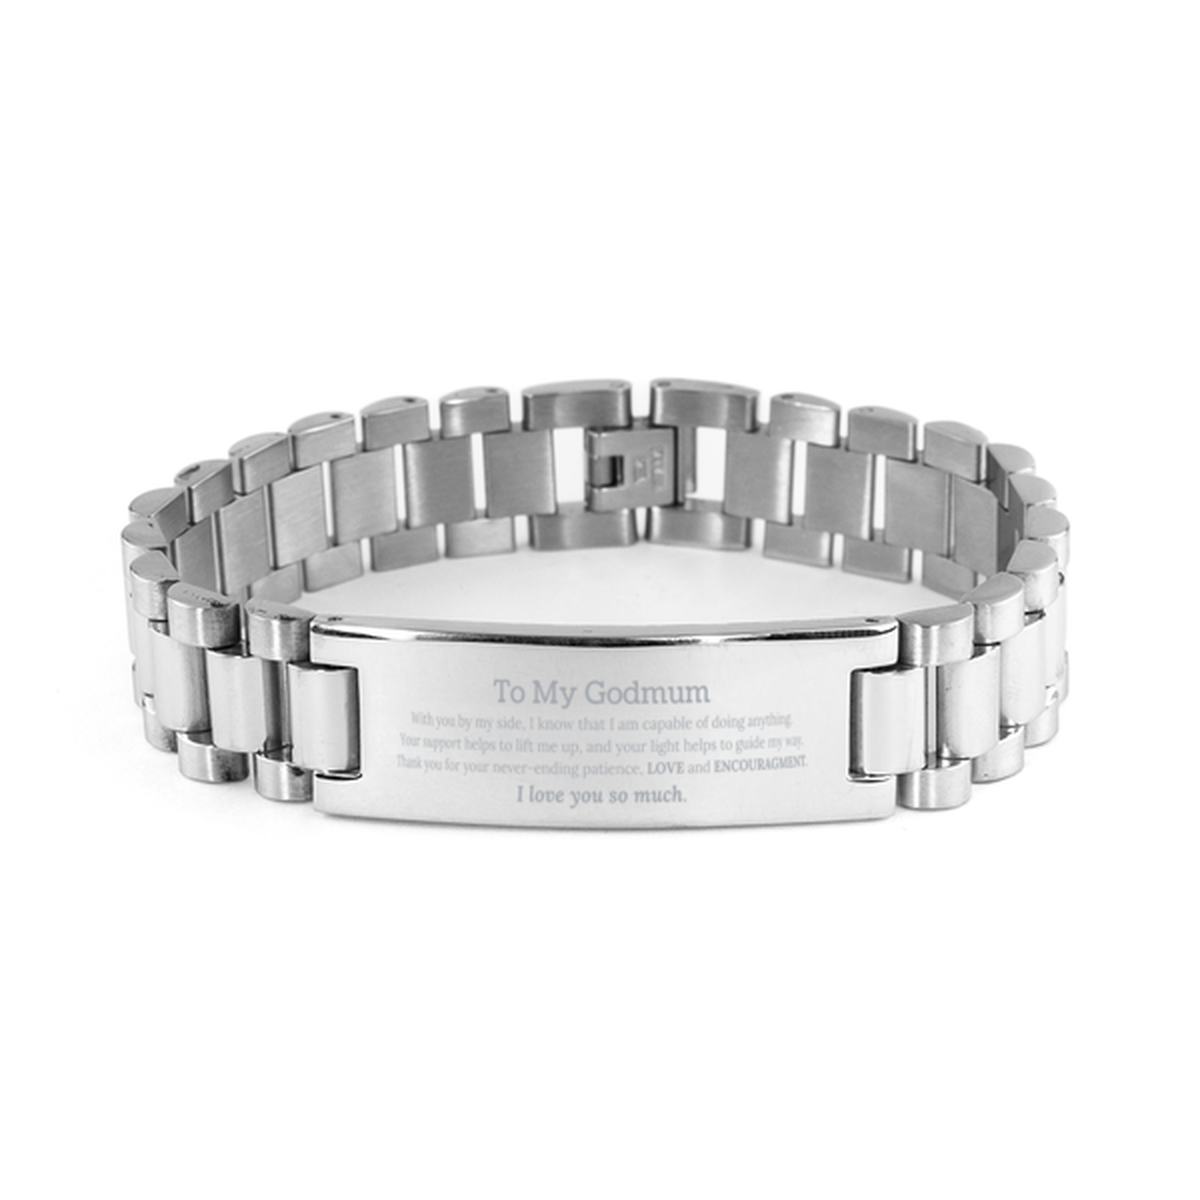 Appreciation Godmum Ladder Stainless Steel Bracelet Gifts, To My Godmum Birthday Christmas Wedding Keepsake Gifts for Godmum With you by my side, I know that I am capable of doing anything. I love you so much